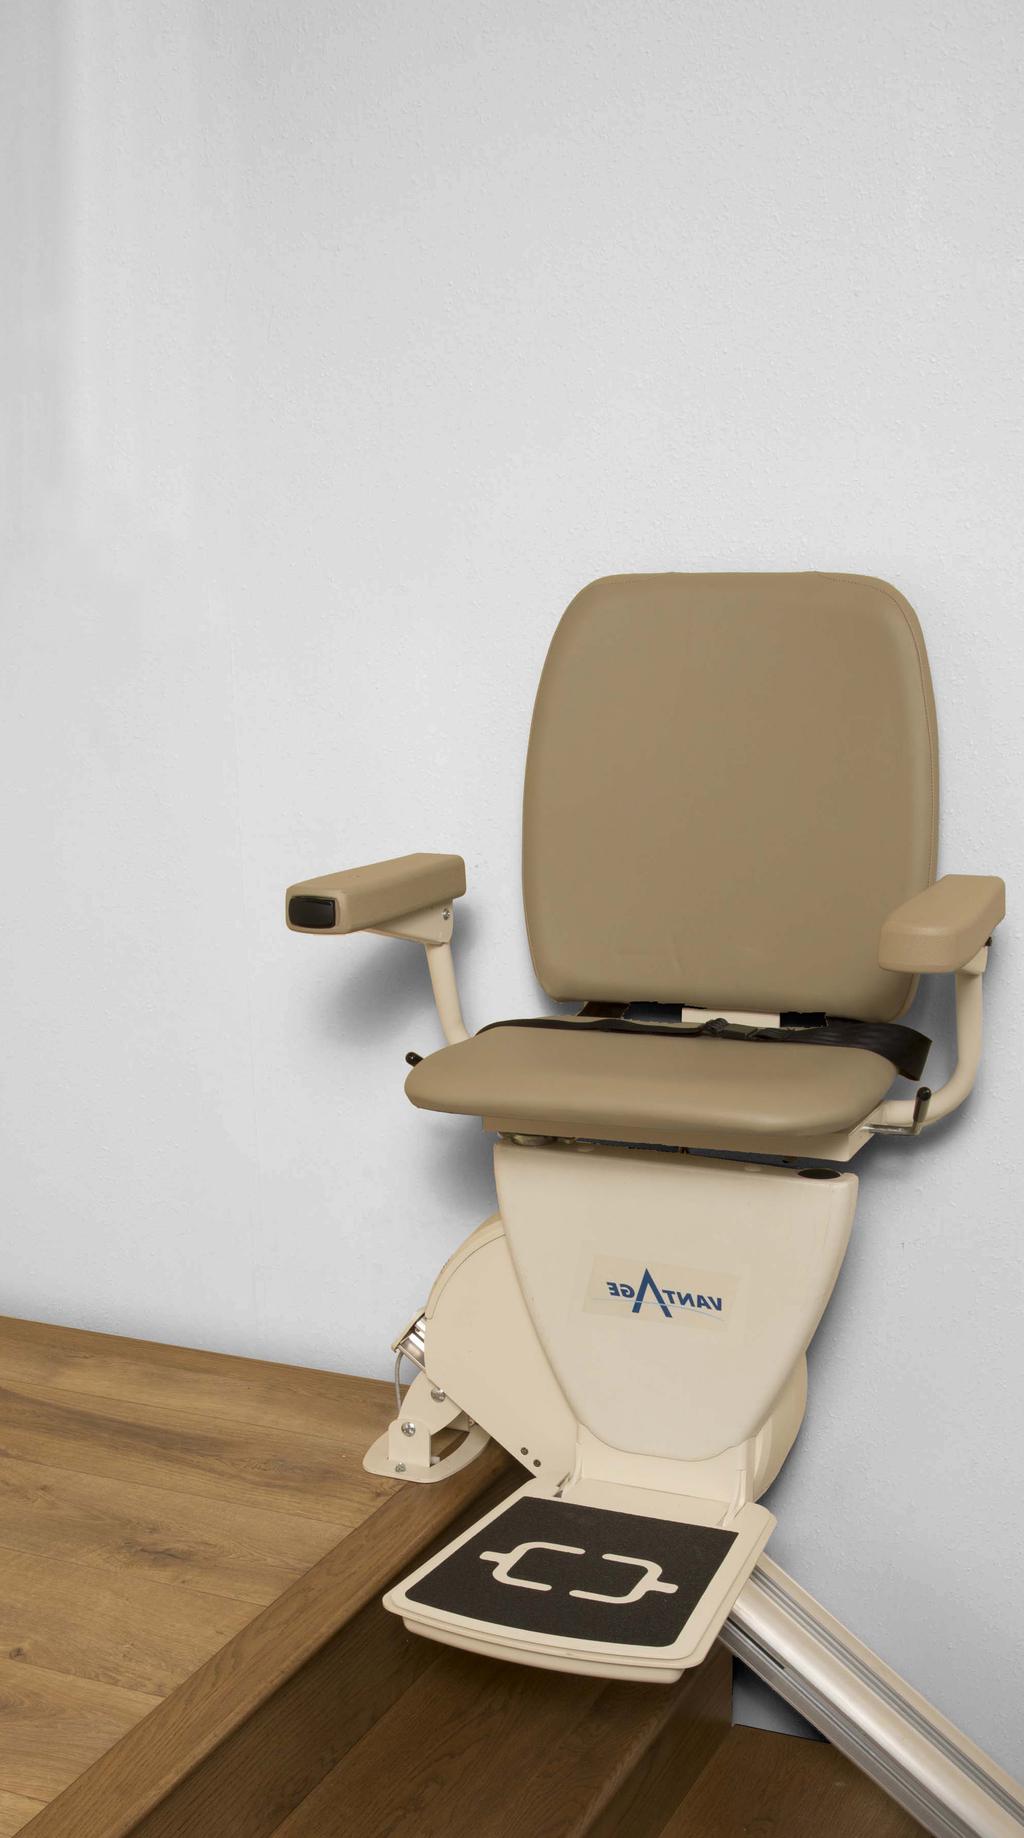 Cost Effective Value of a Vantage SL400 Comfortable The Vantage SL400 straight stair lift is a